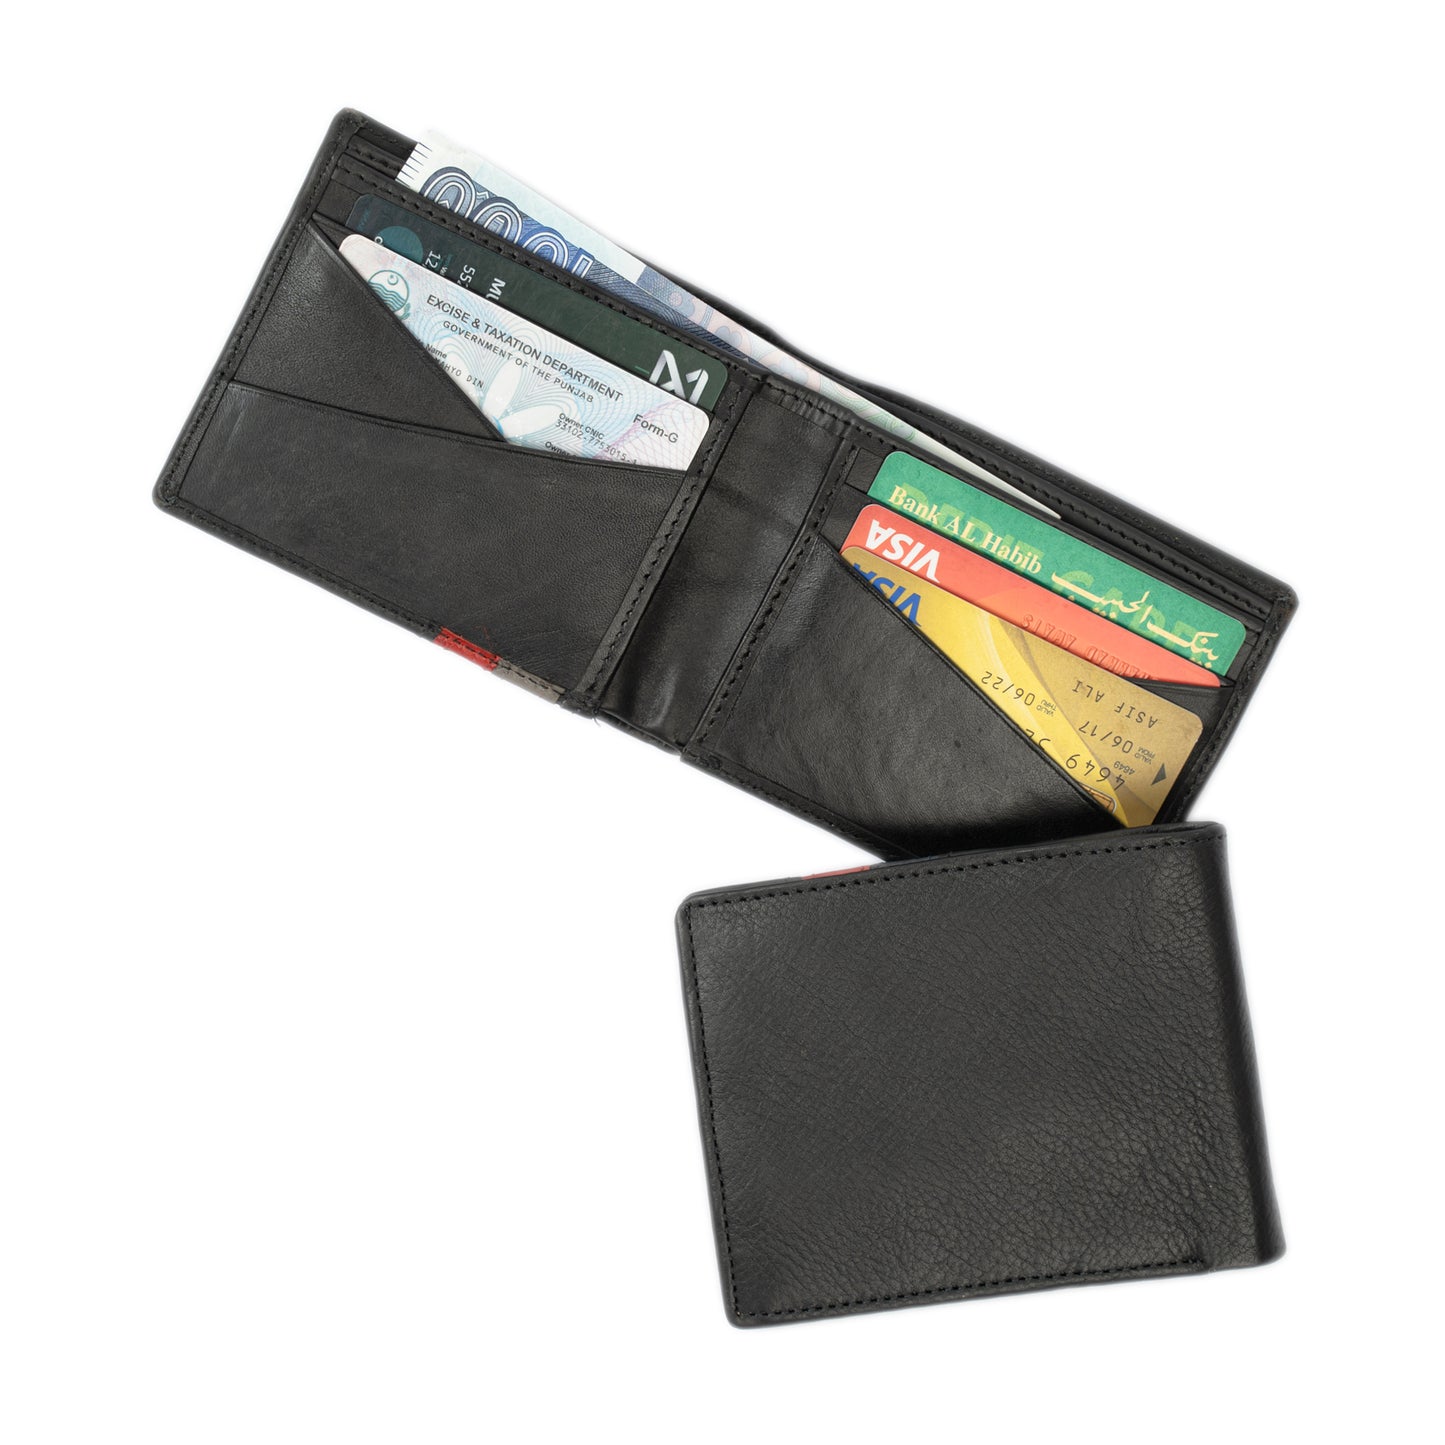 "Artisanal Mastery: Handcrafted Leather Wallet"